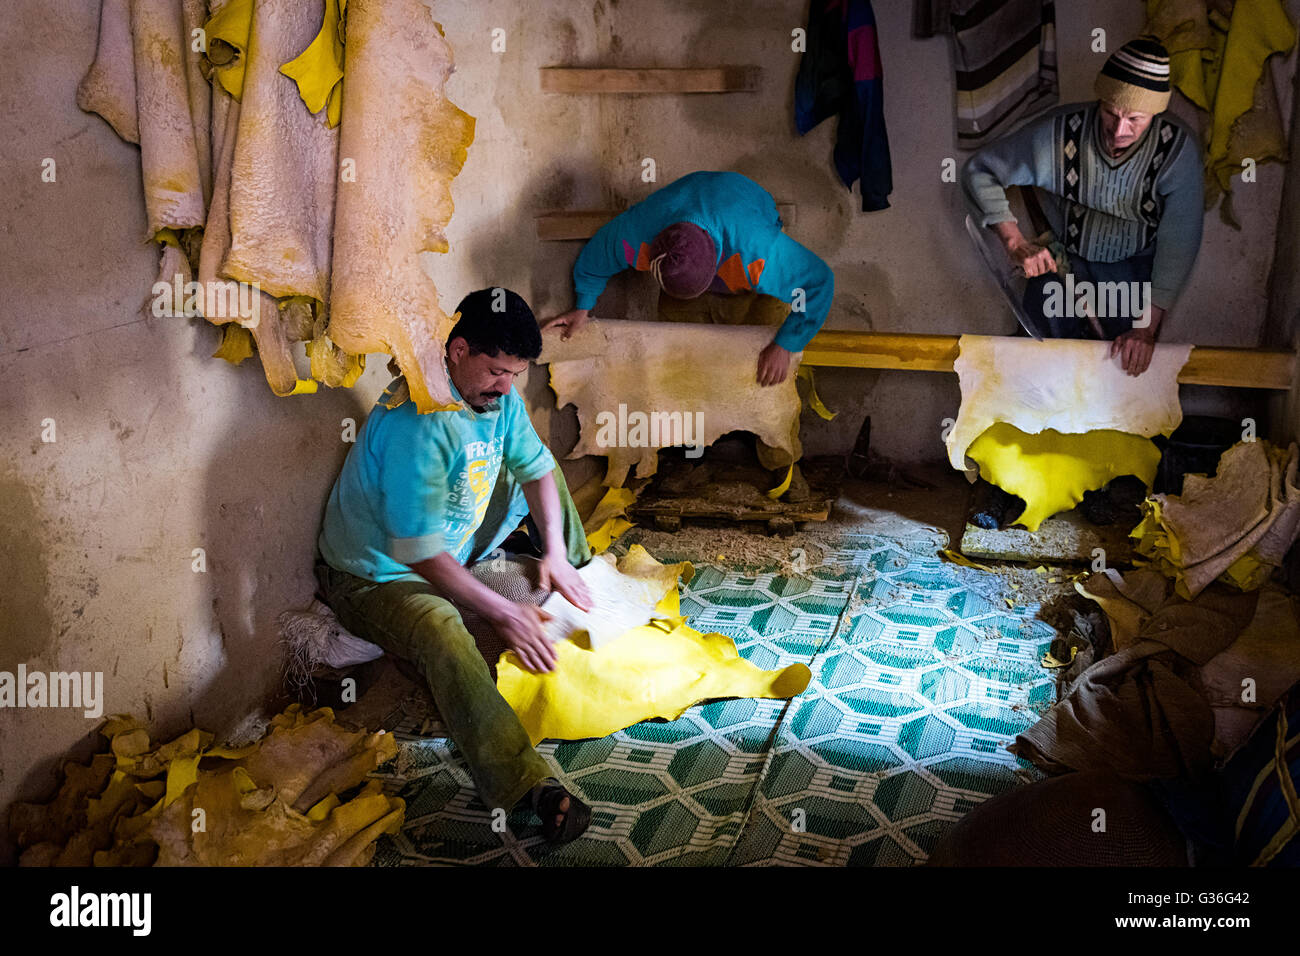 Fez, Morocco - April 11, 2016: Tree man working in a tannery in the city of Fez in Morocco. Stock Photo